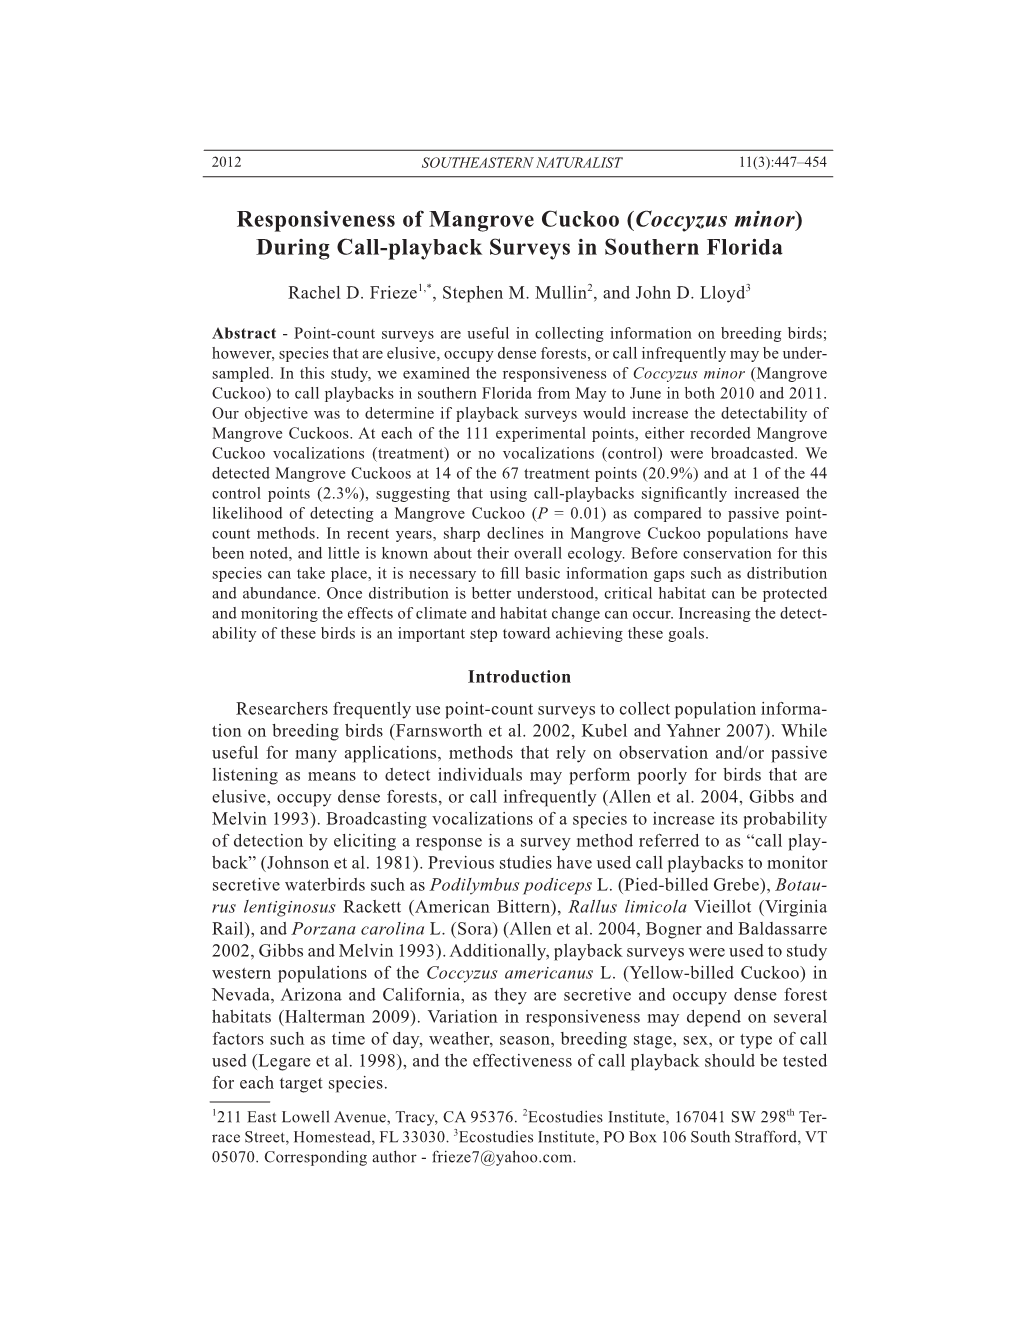 Responsiveness of Mangrove Cuckoo (Coccyzus Minor) During Call-Playback Surveys in Southern Florida